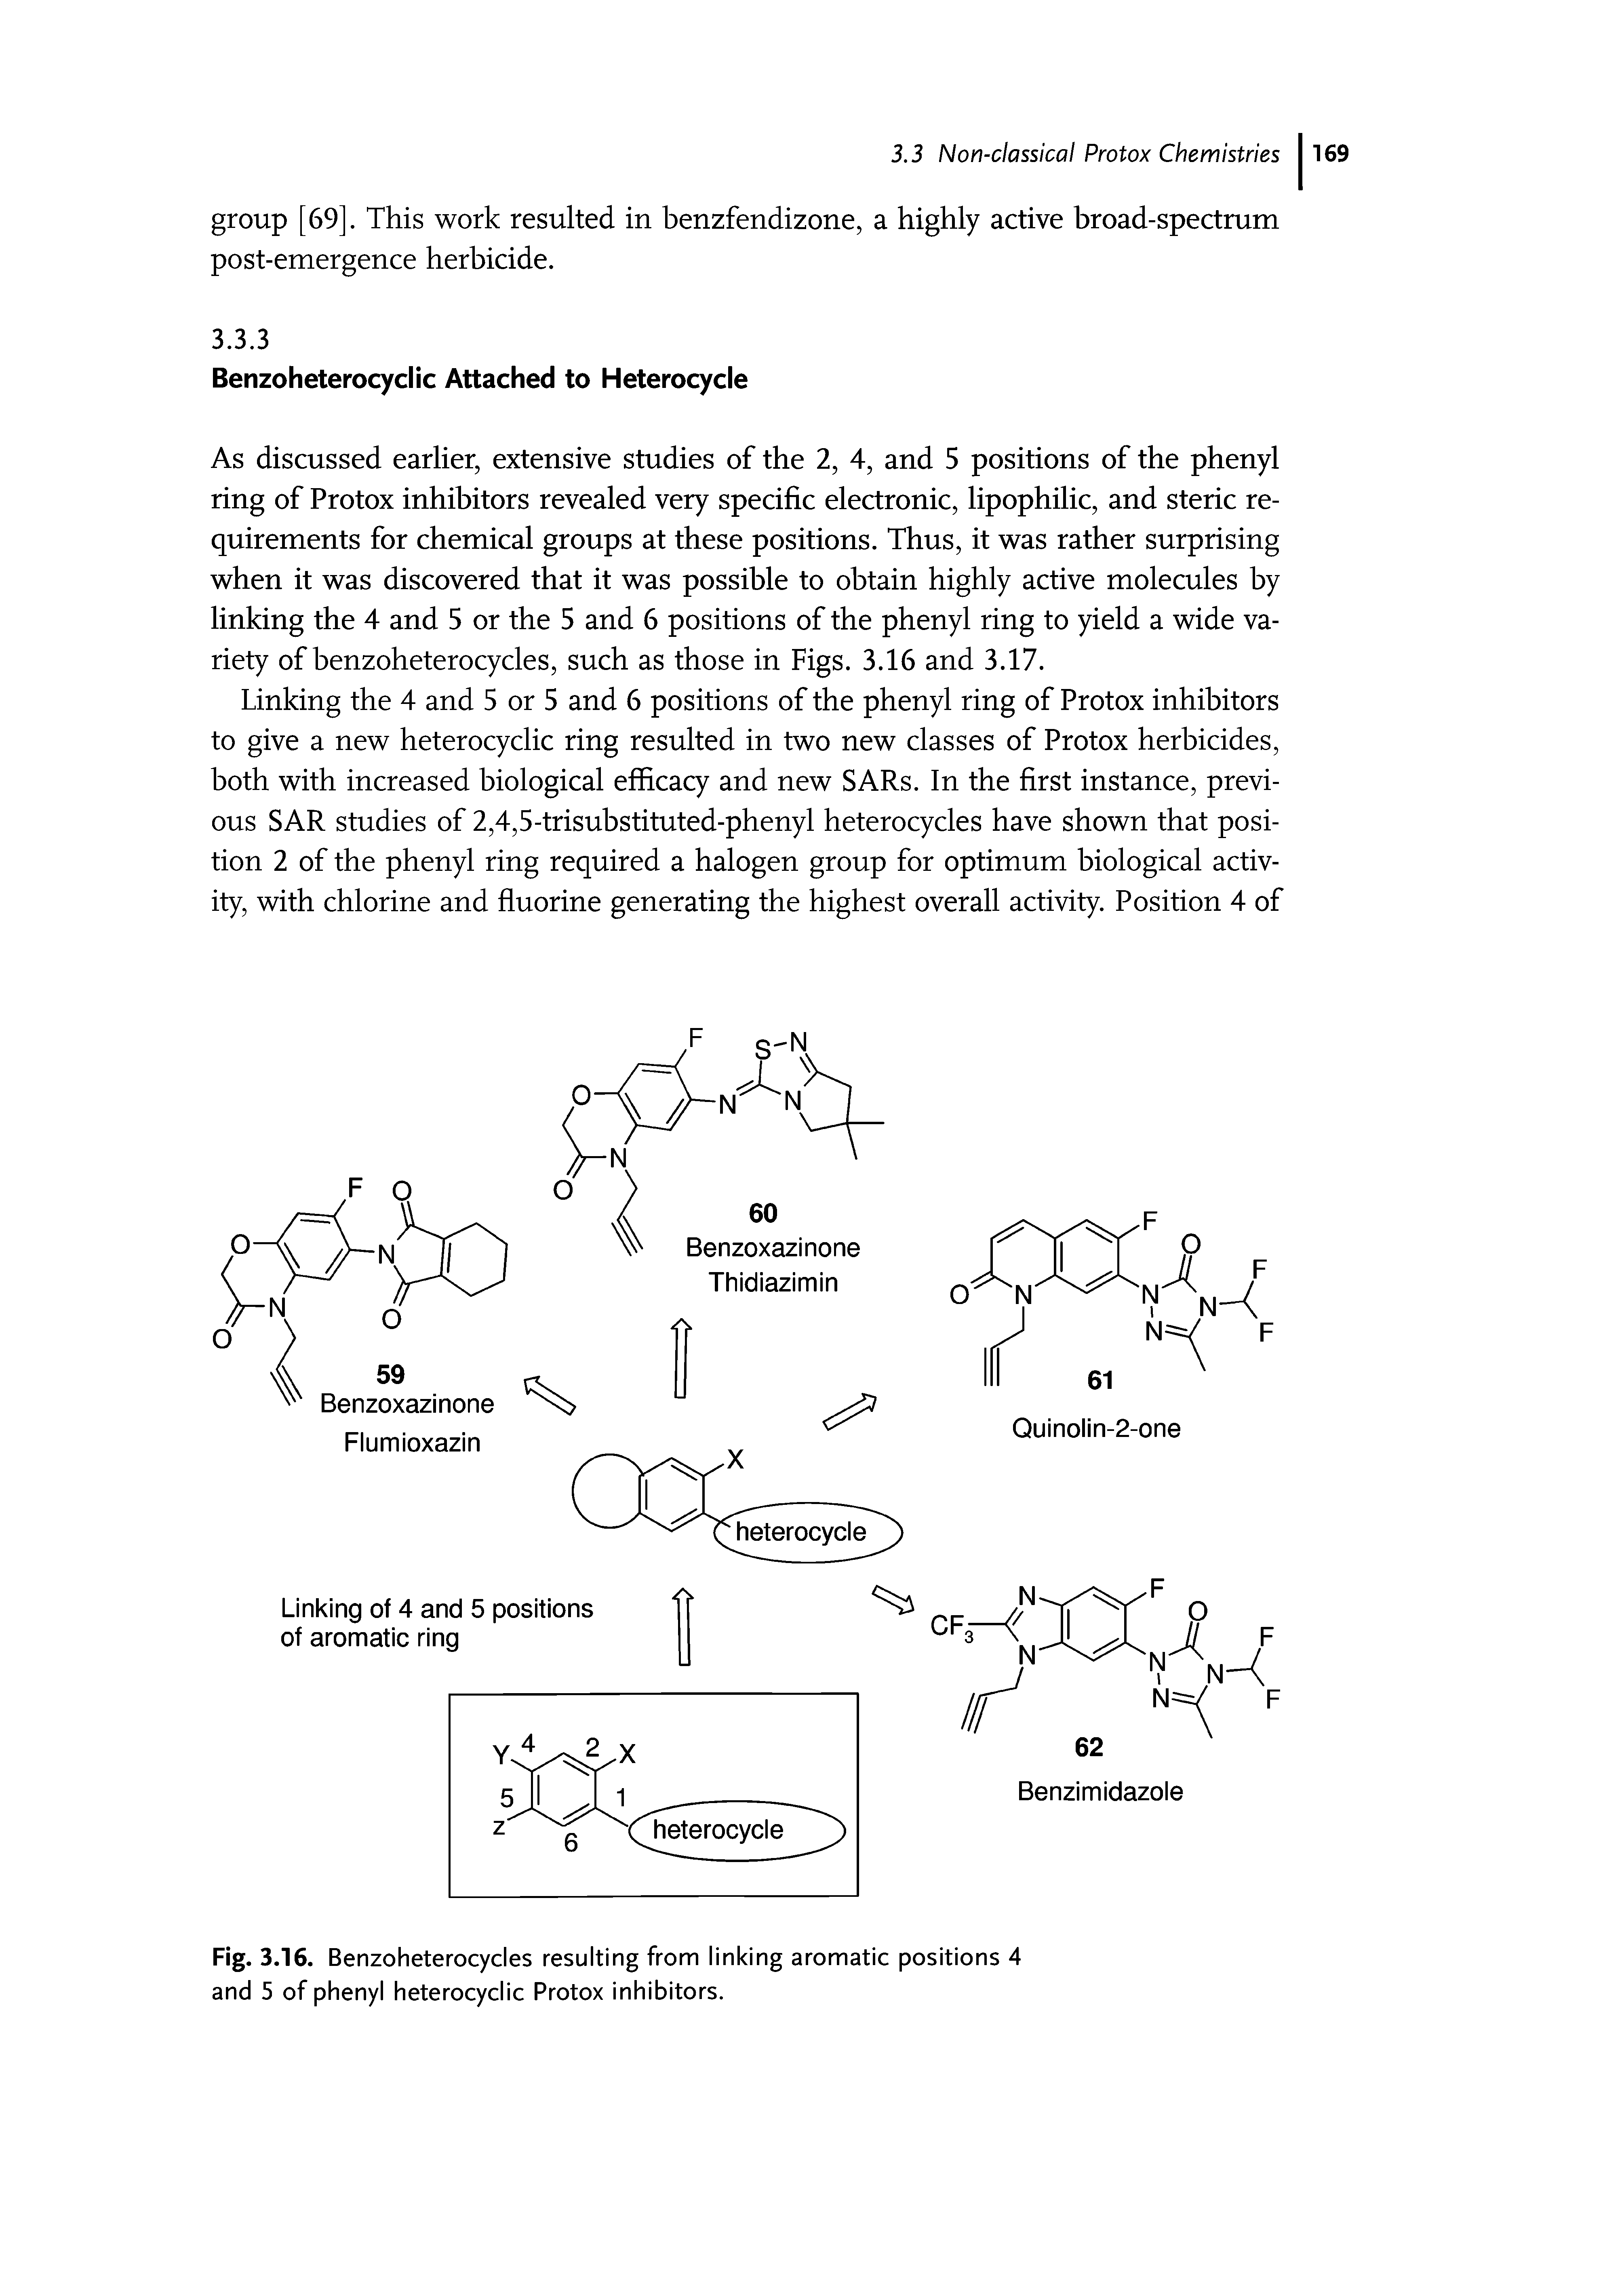 Fig. 3.16. Benzoheterocycles resulting from linking aromatic positions 4 and 5 of phenyl heterocyclic Protox inhibitors.